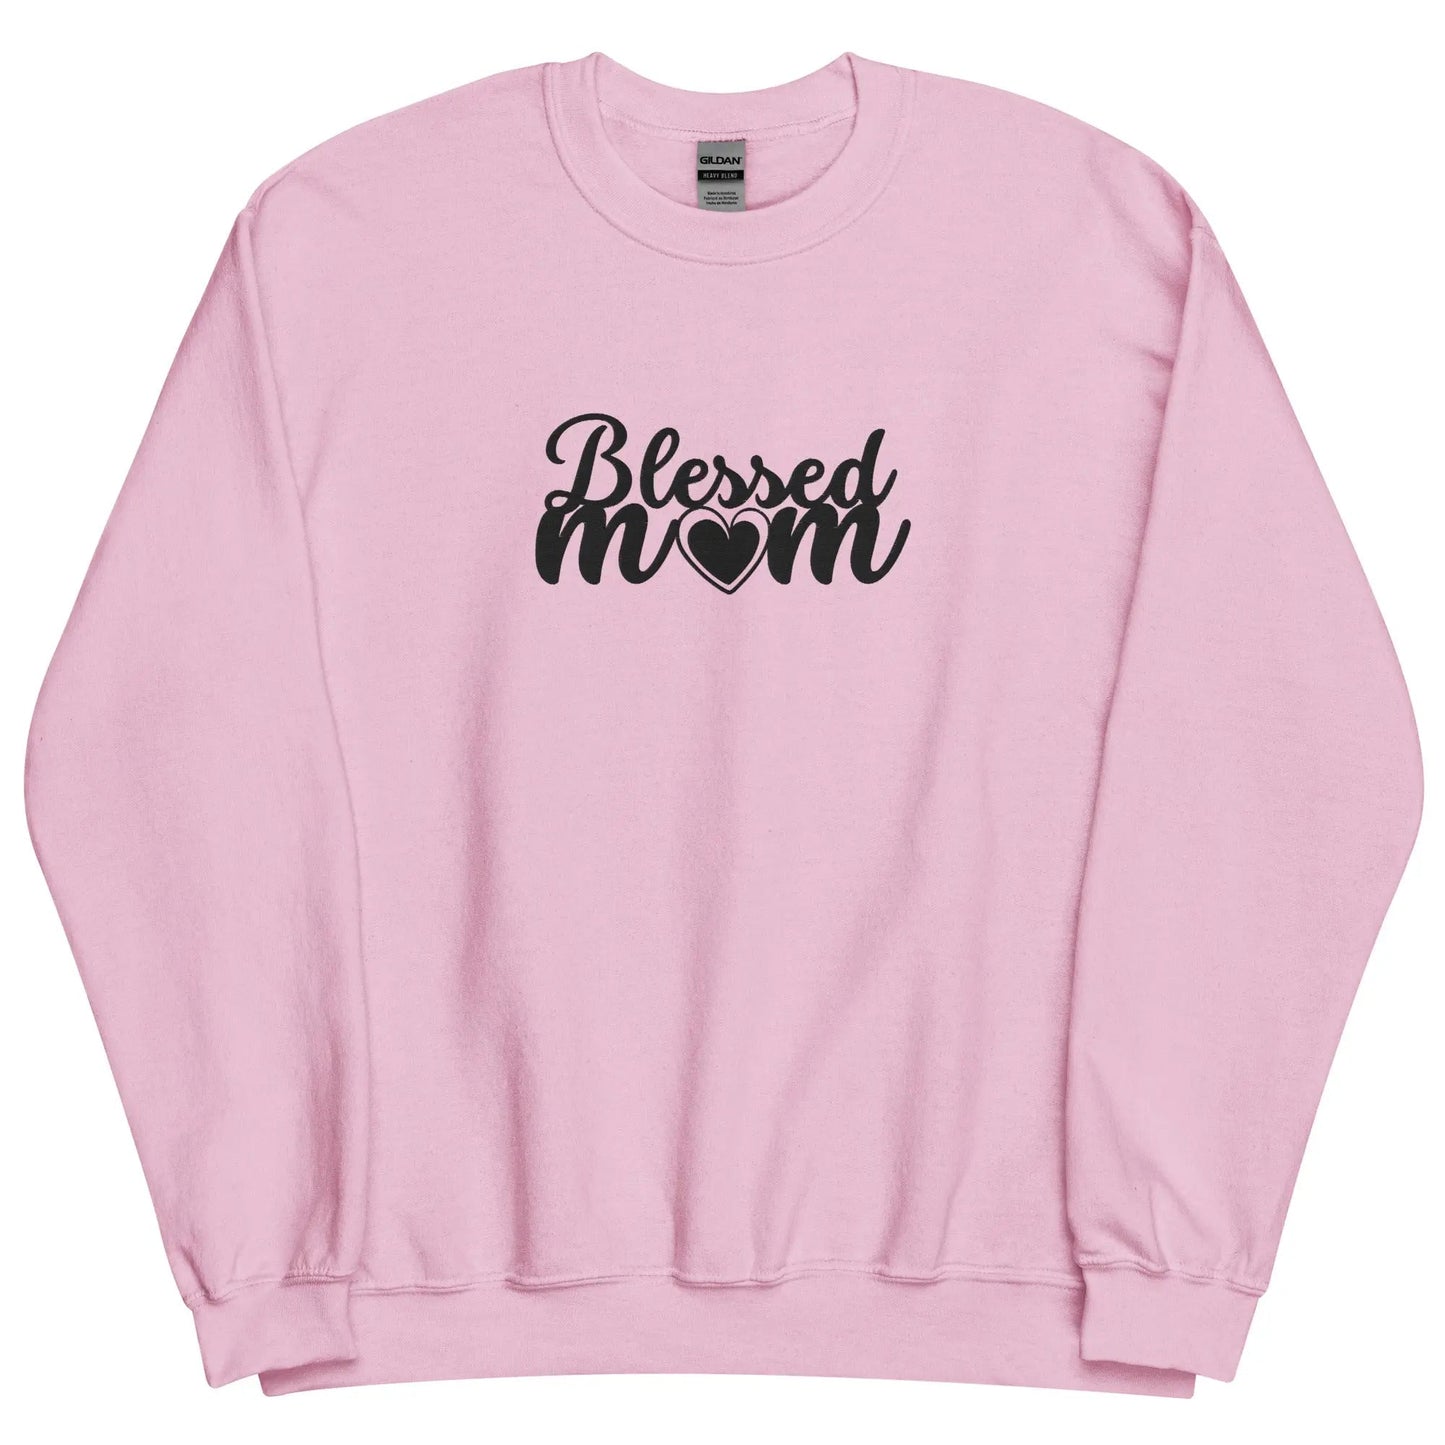 Embroidered Blessed Mom Embroidery Sweatshirt-clothes- sweater-Light Pink-S-mysticalcherry